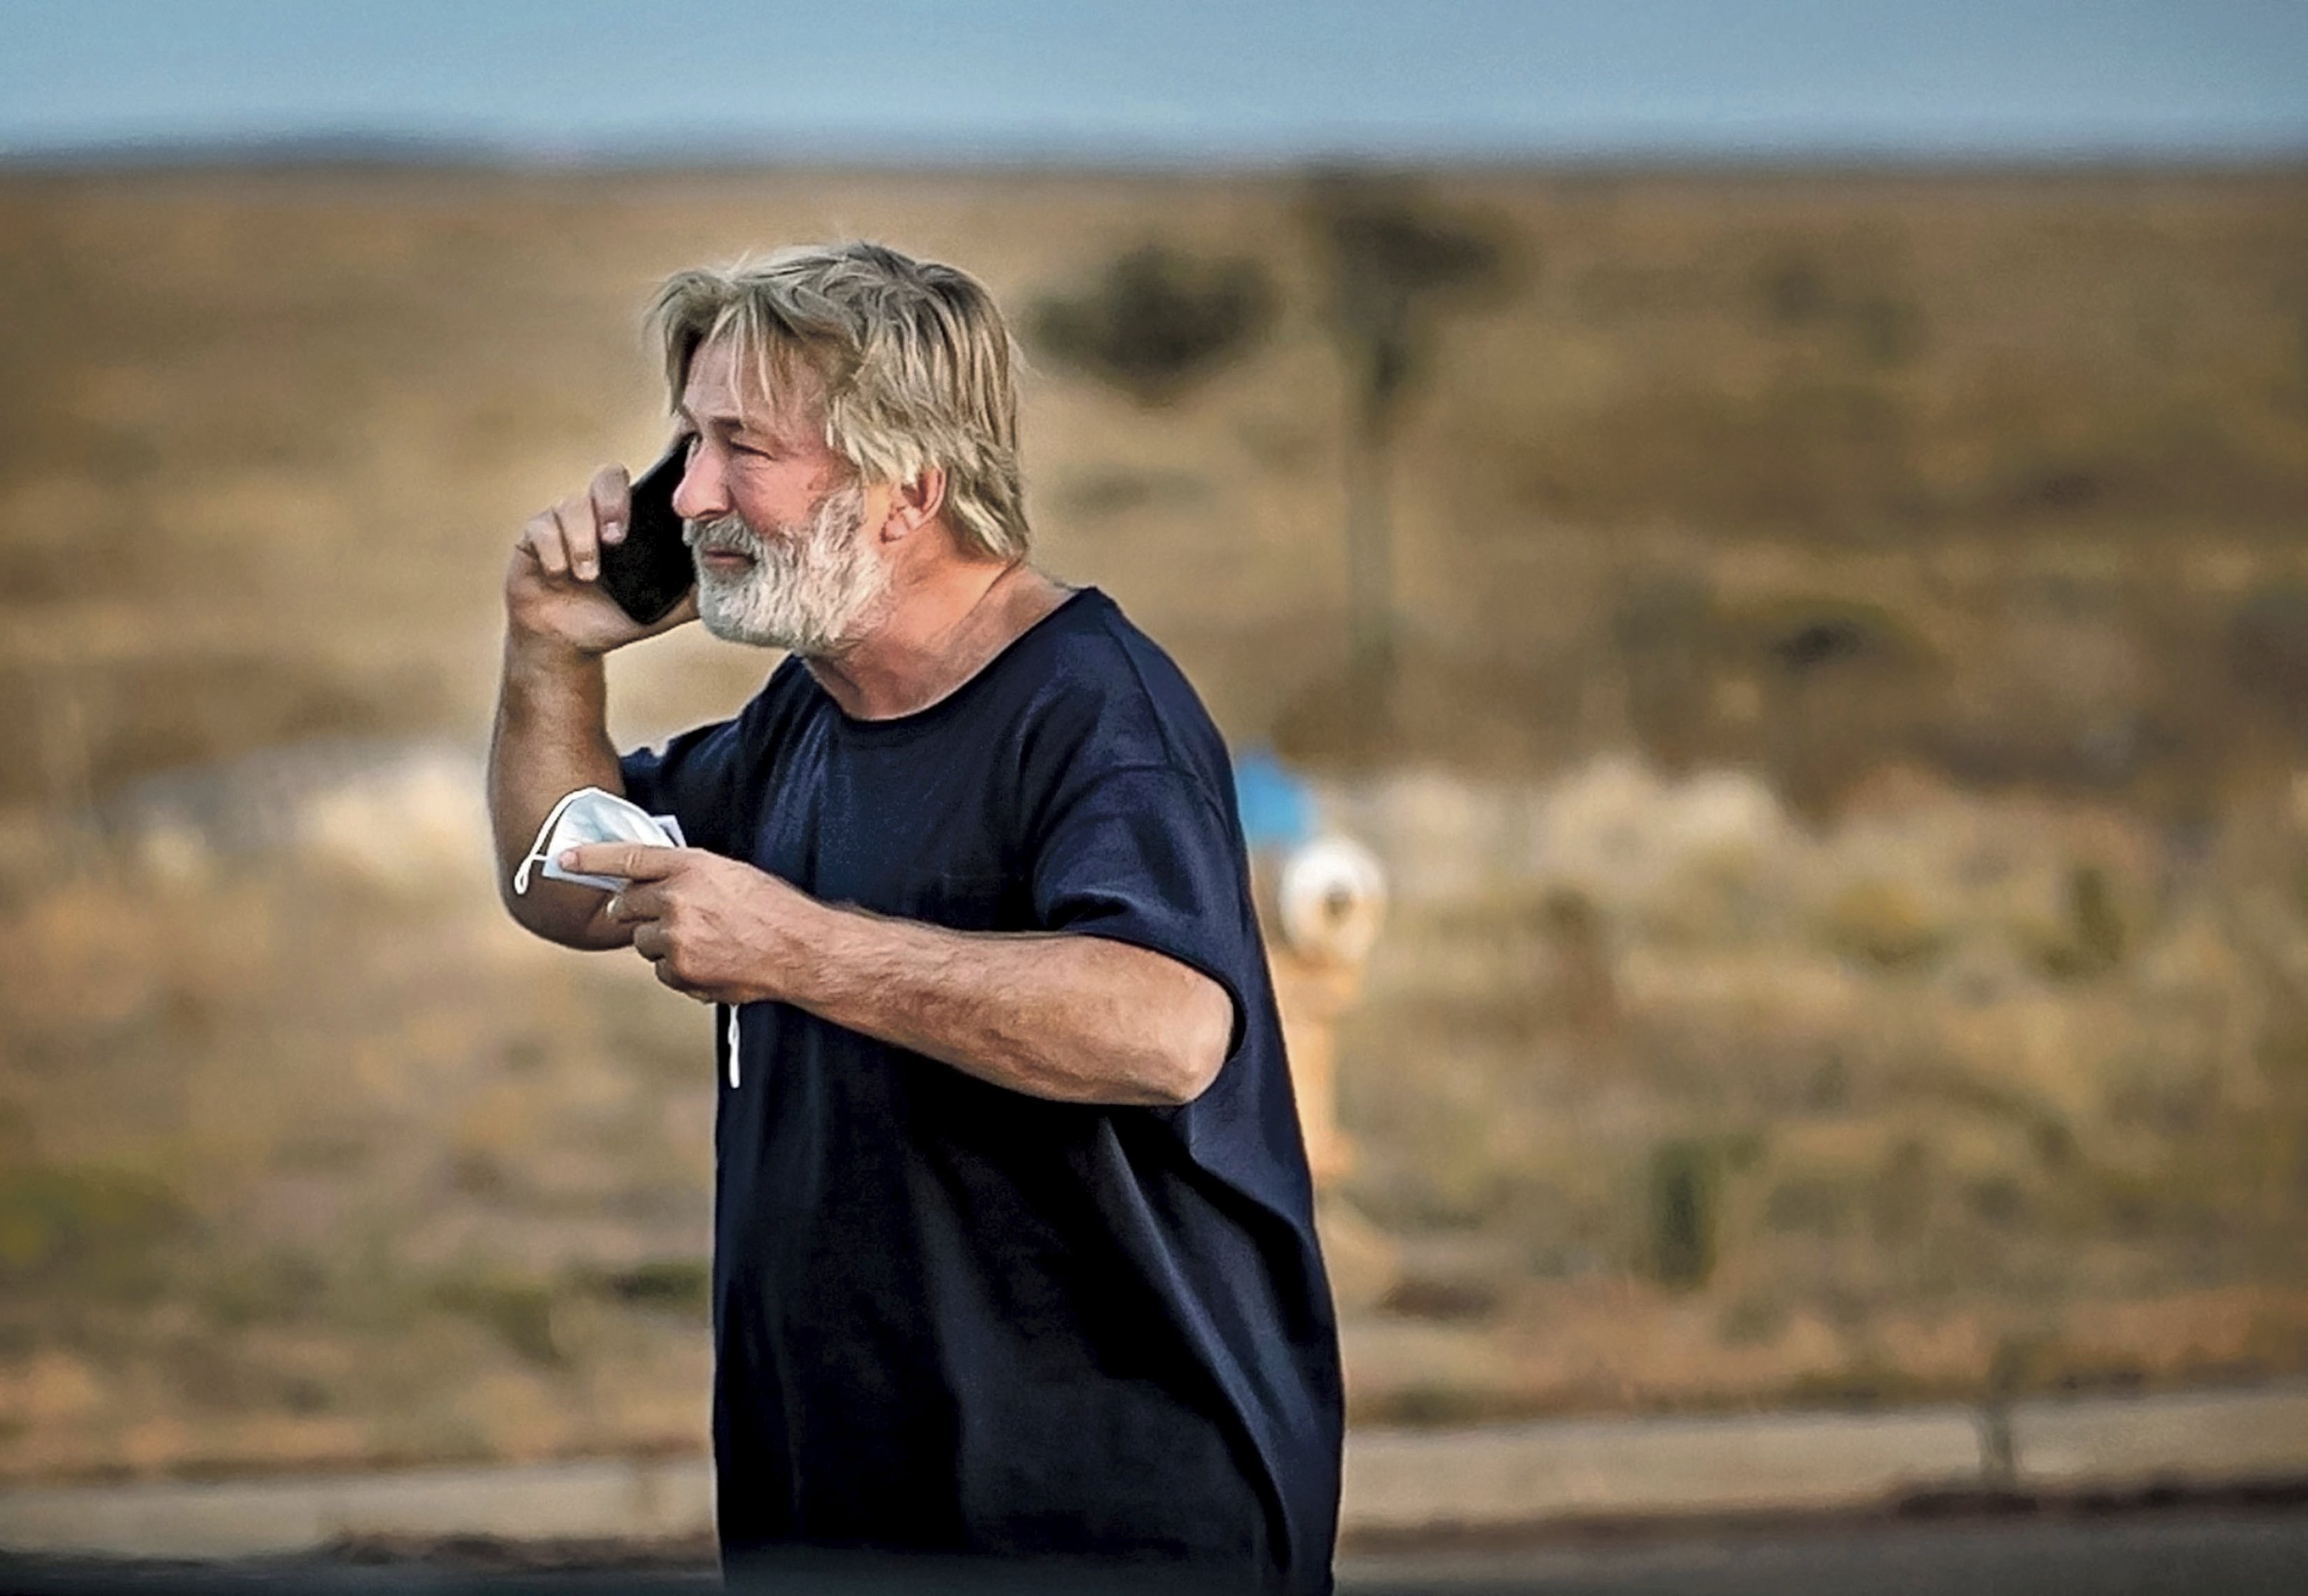 Alec Baldwin speaks on the phone in the parking lot outside the Santa Fe County Sheriff's Office in Santa Fe, New Mexico, U.S., Oct. 21, 2021. (AP Photo)